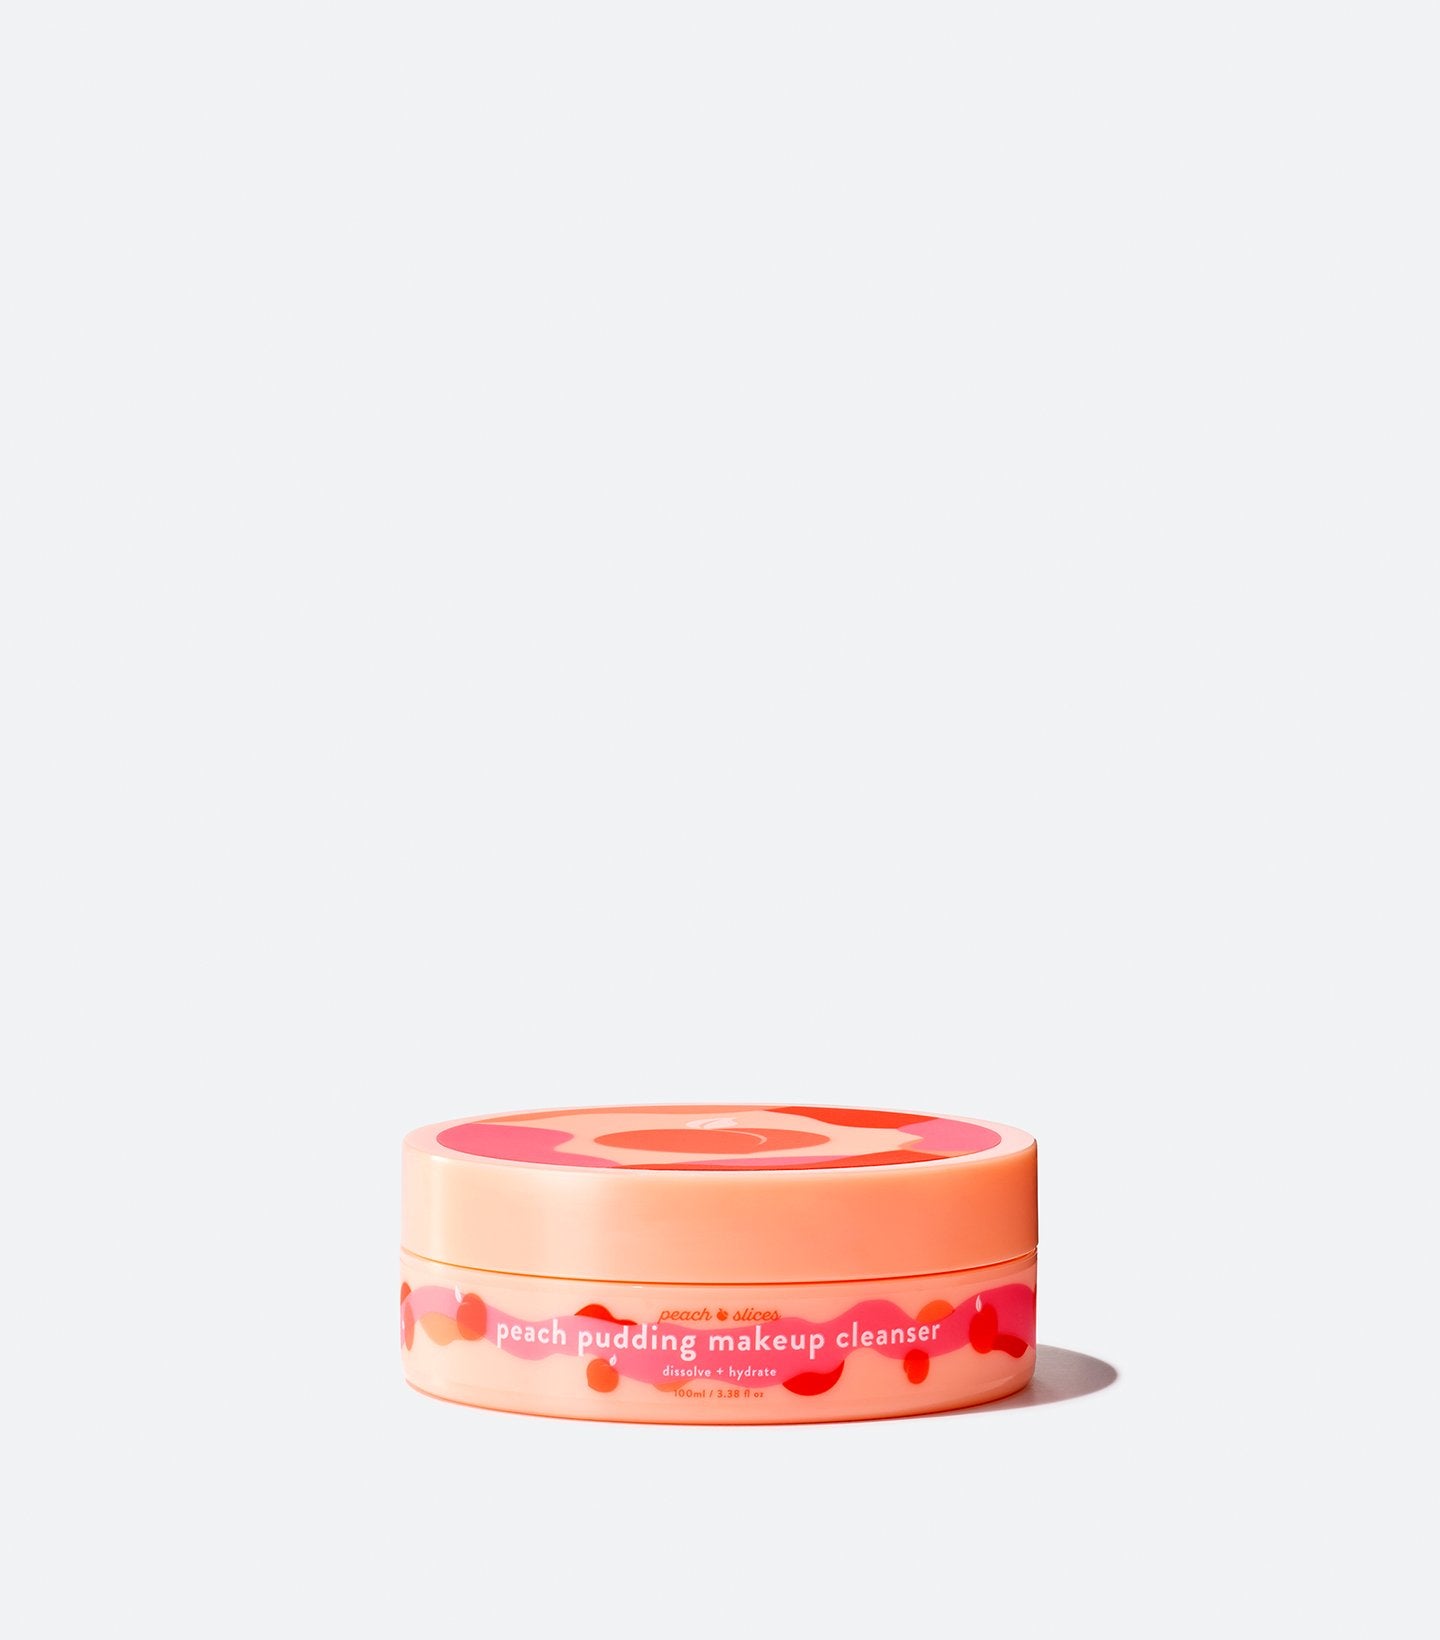 Peach Pudding Makeup Cleanser